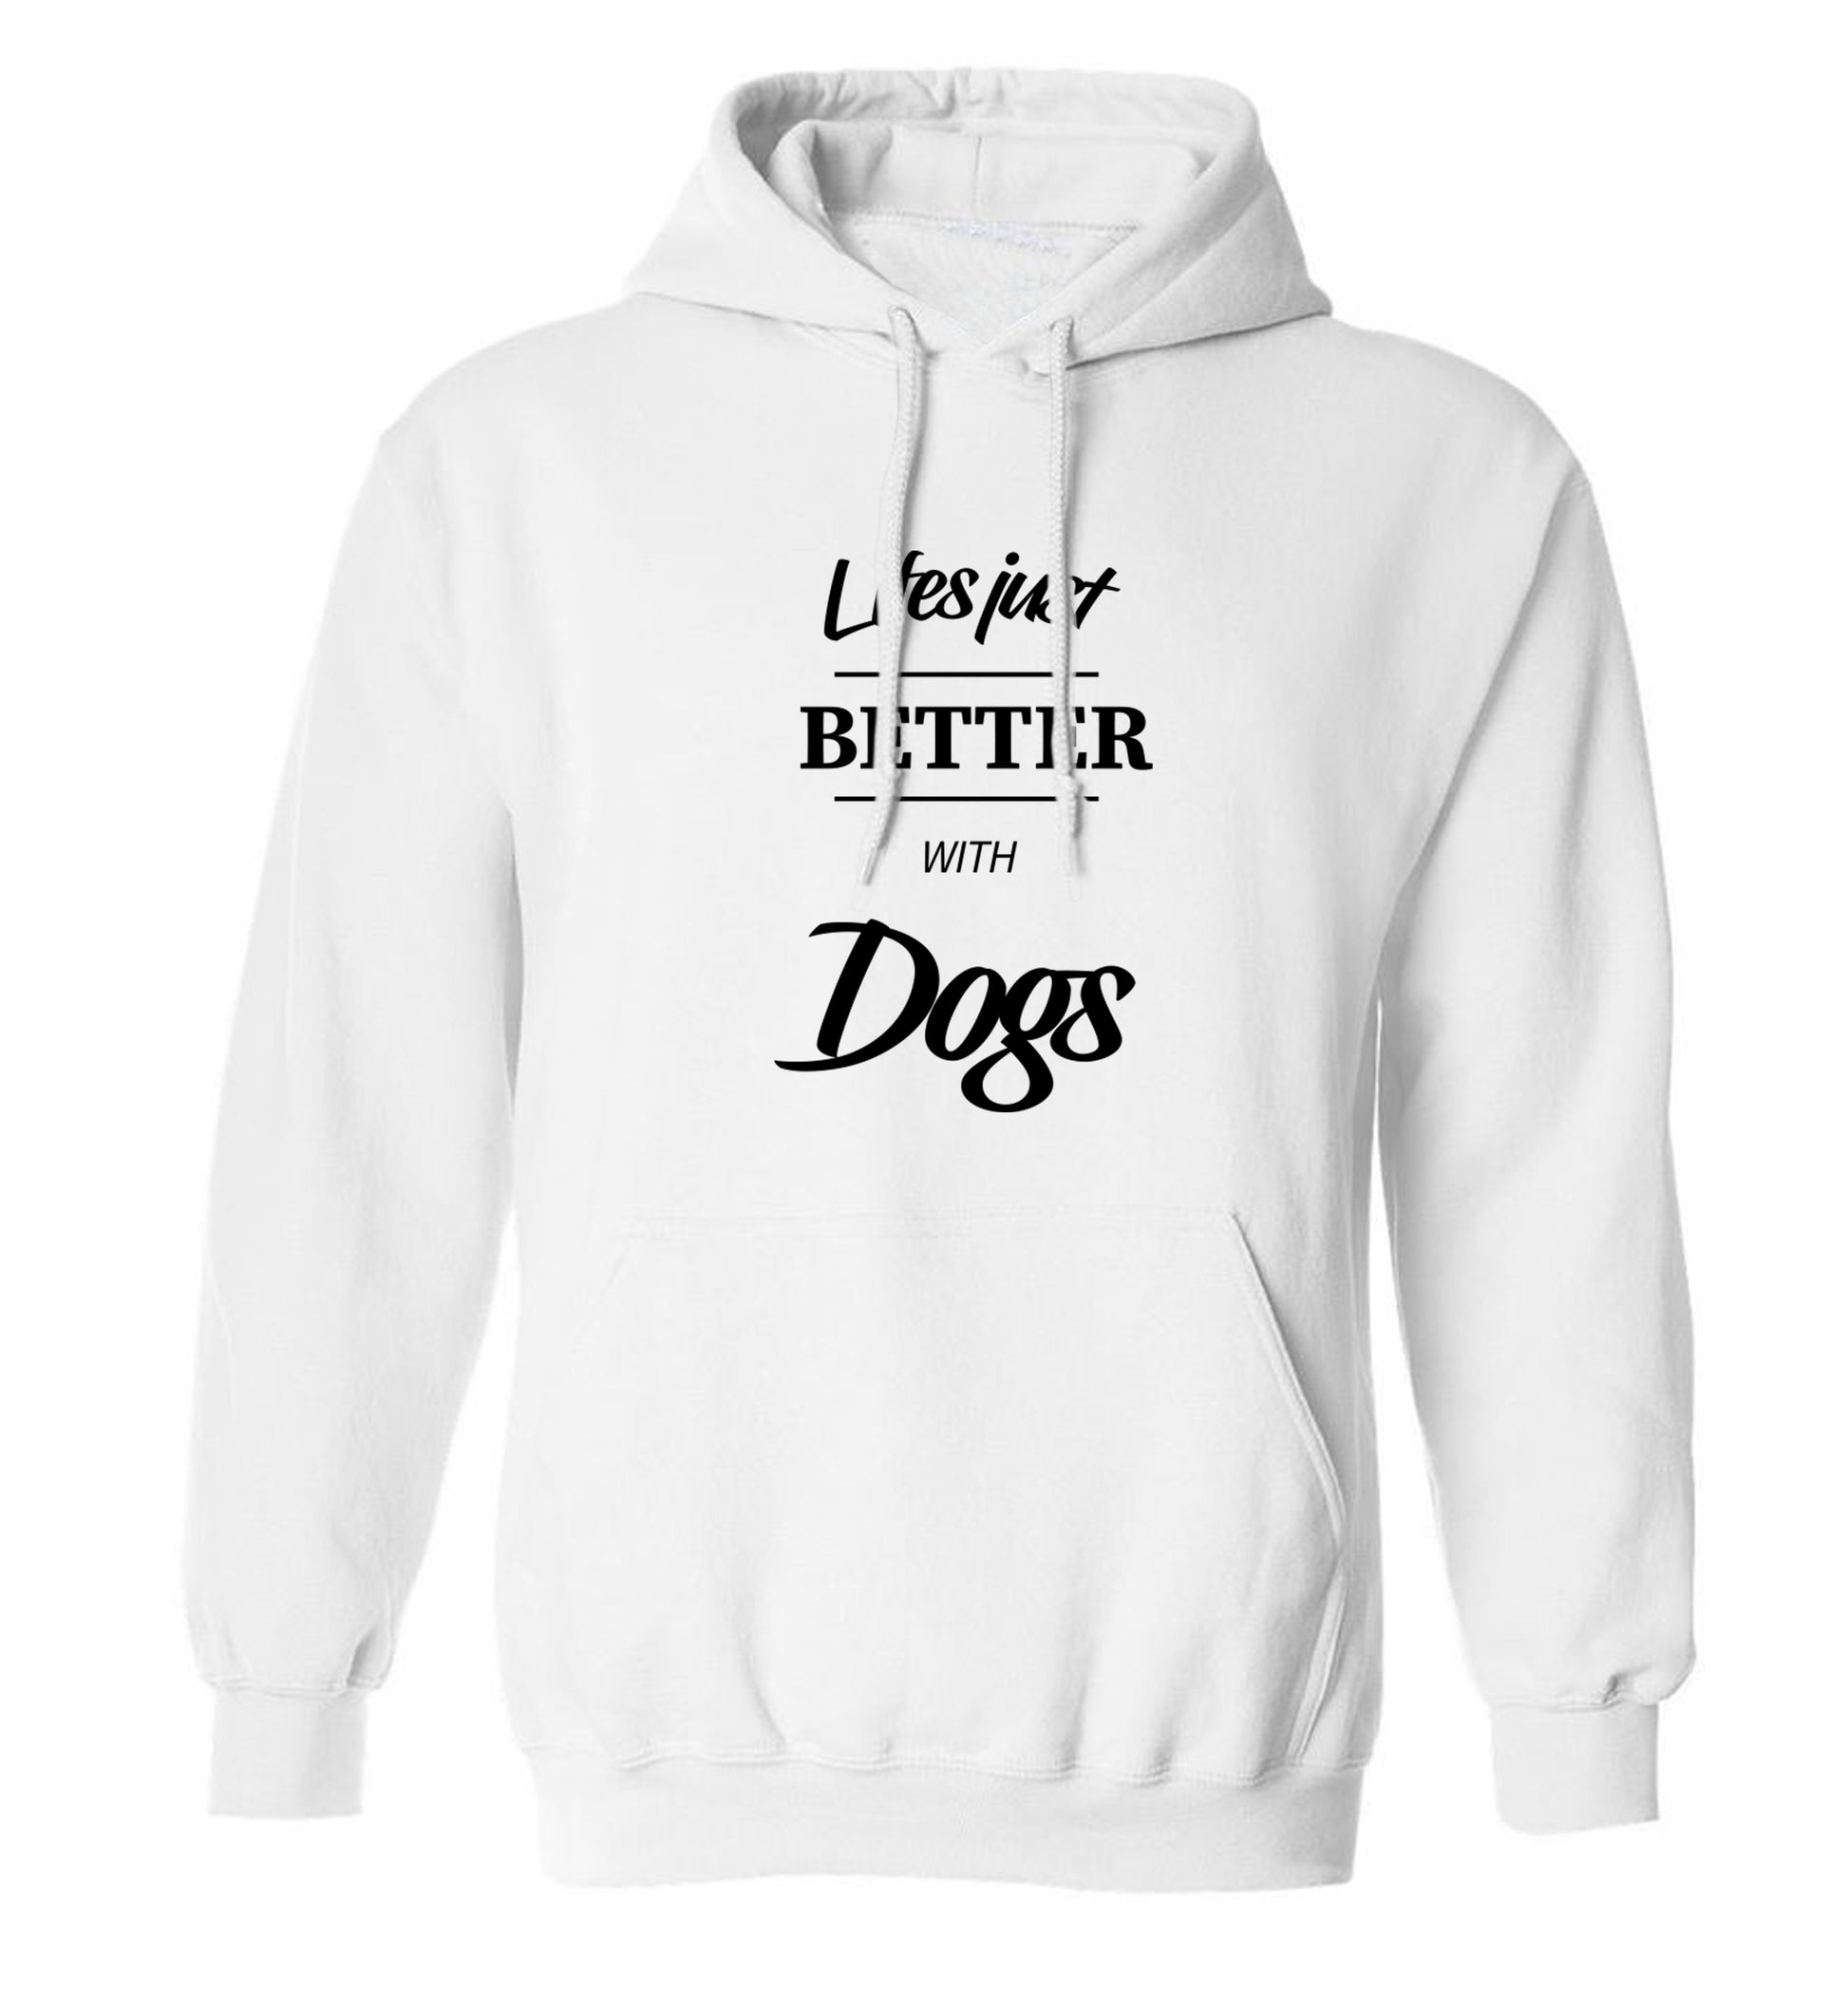 life is better with dogs adults unisex white hoodie 2XL